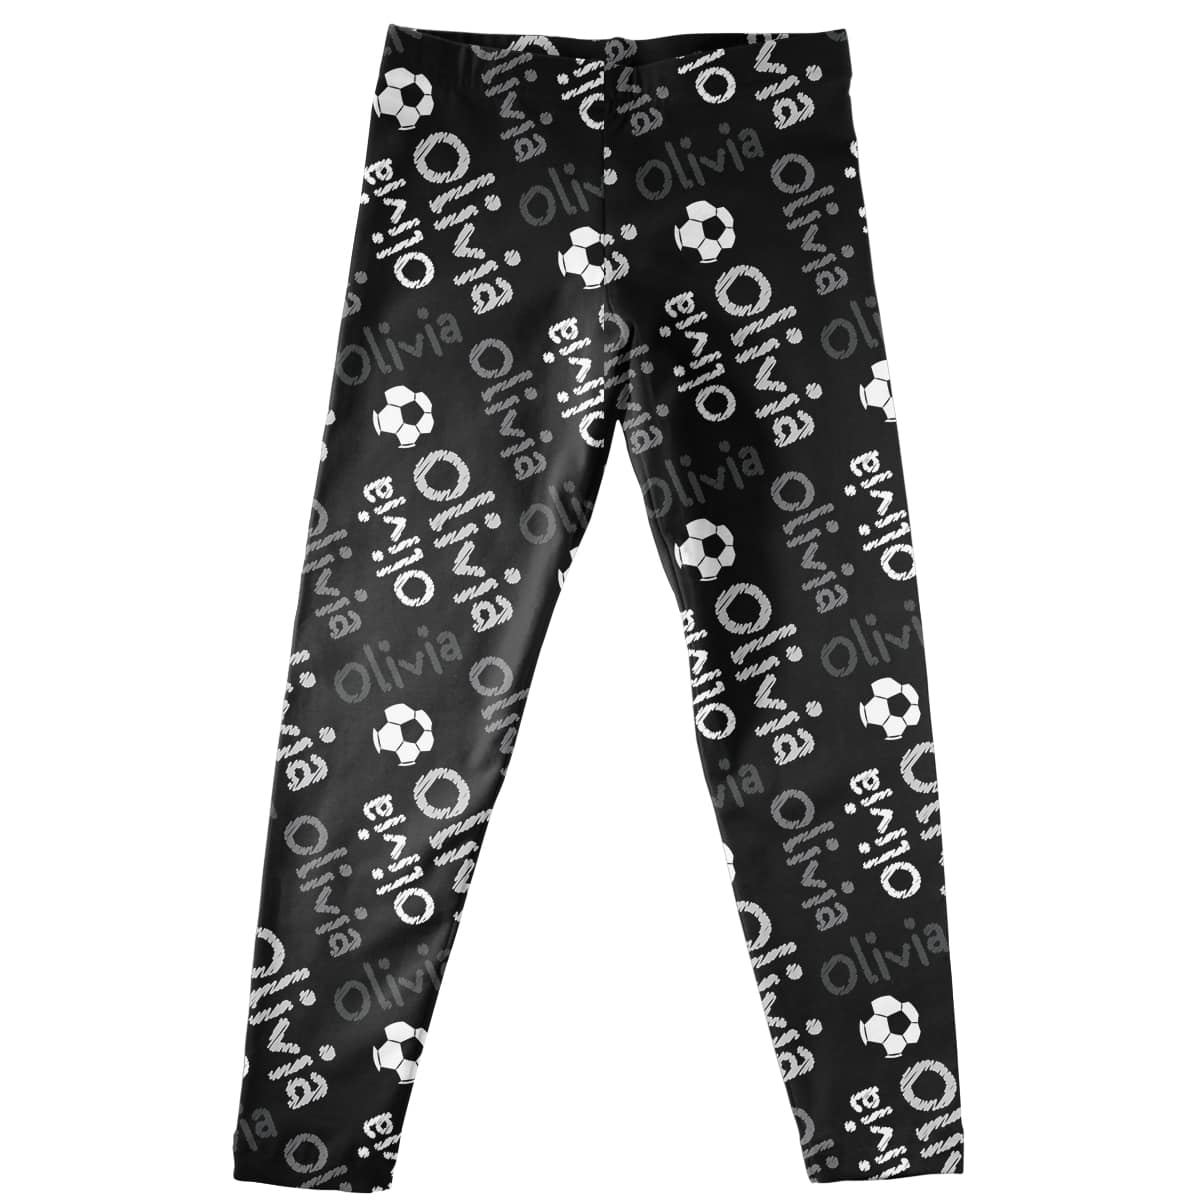 Soccer Ball and Personalized Name Print Black Leggings - Wimziy&Co.